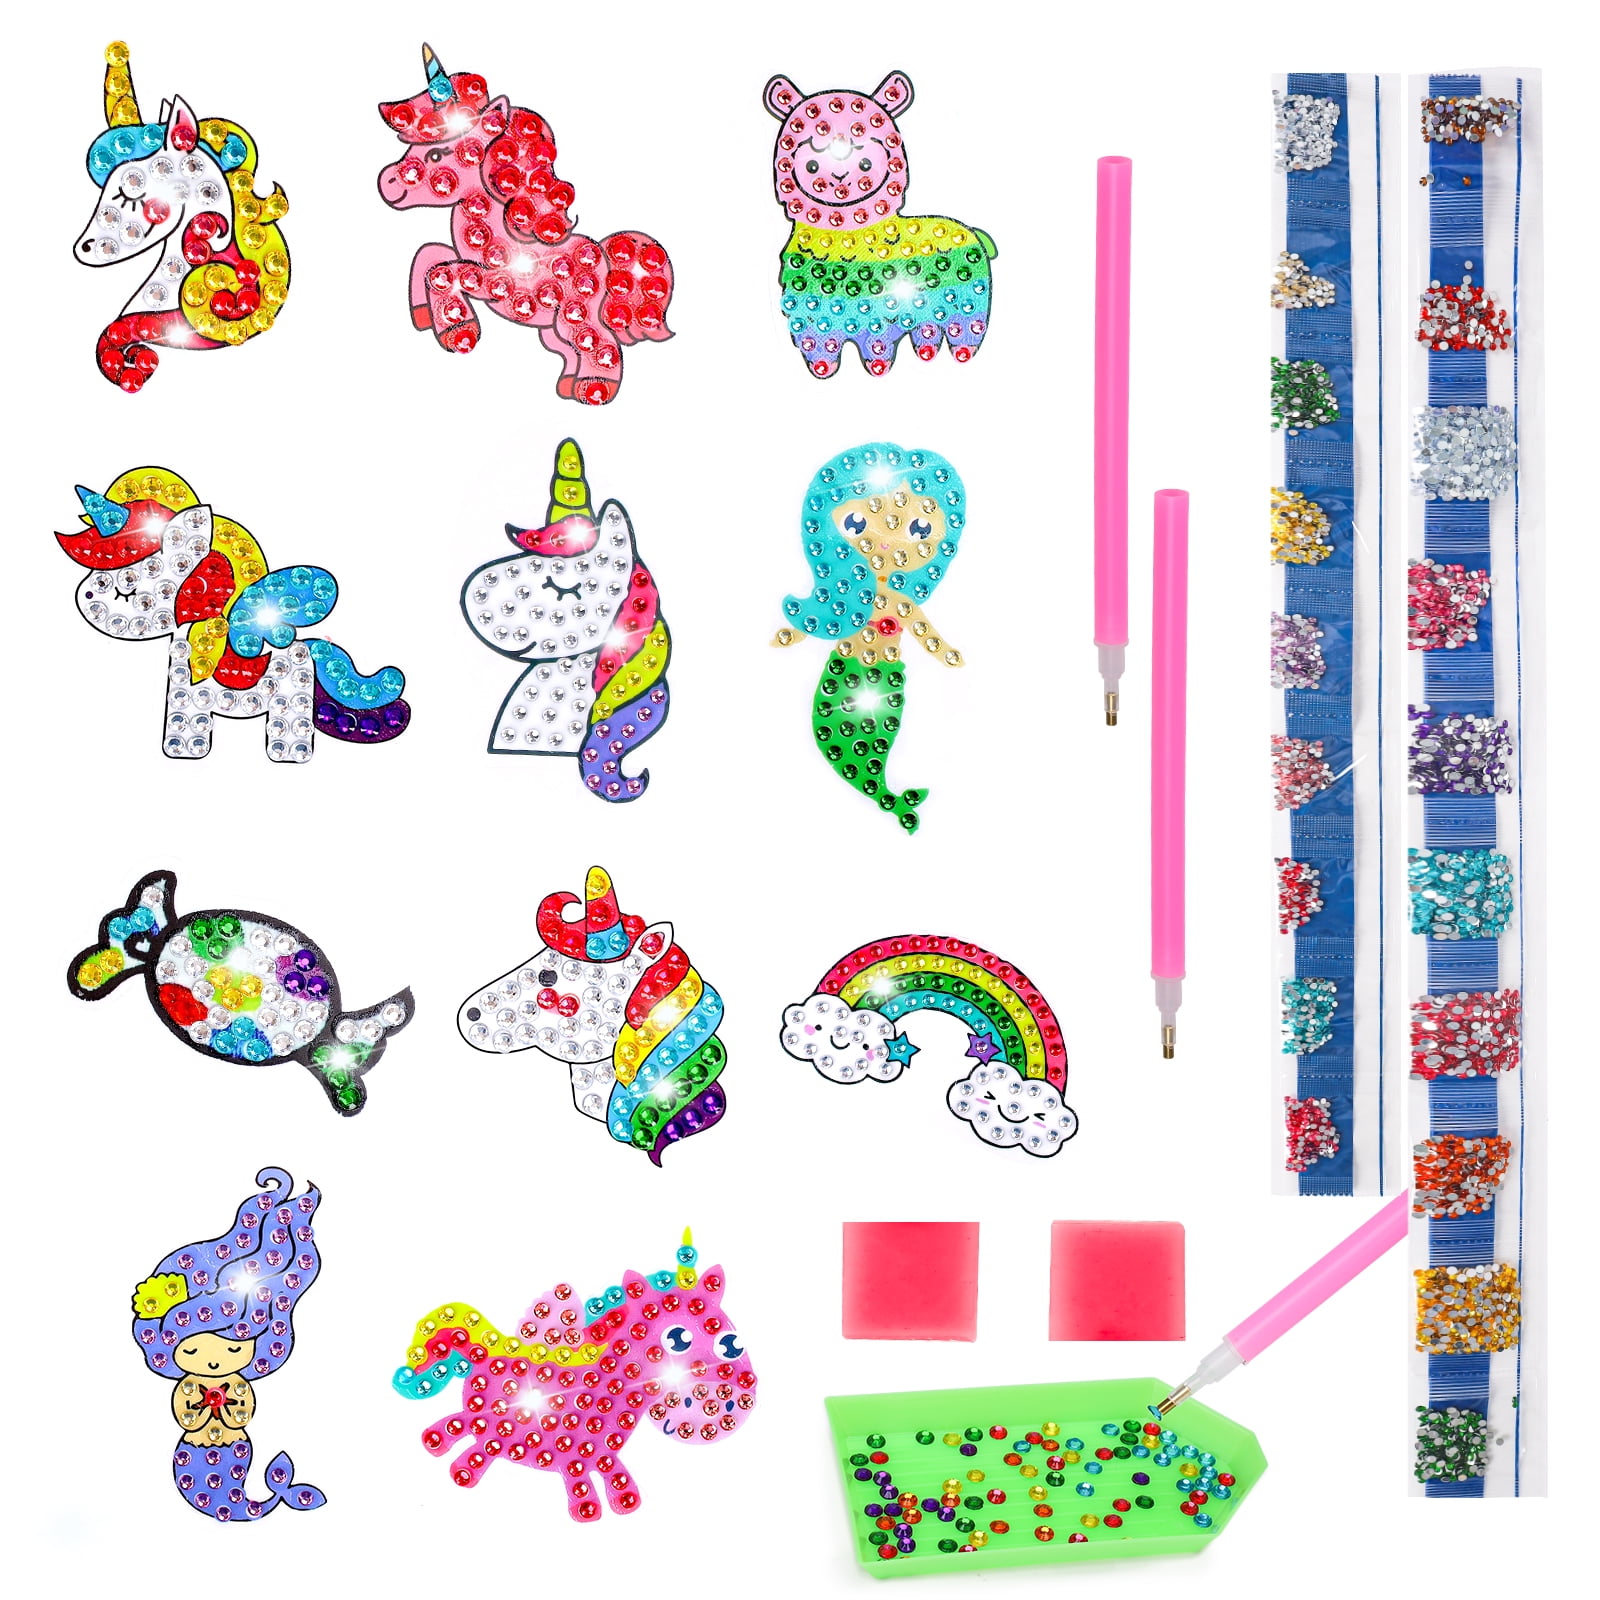 KMUYSL Unicorn Painting Kit, Arts and Crafts for Kids Ages 4-8+, Art  Supplies with 8 Unicorn Figurines, Kids Toy Birthday Gifts for Boys Girls  3-5